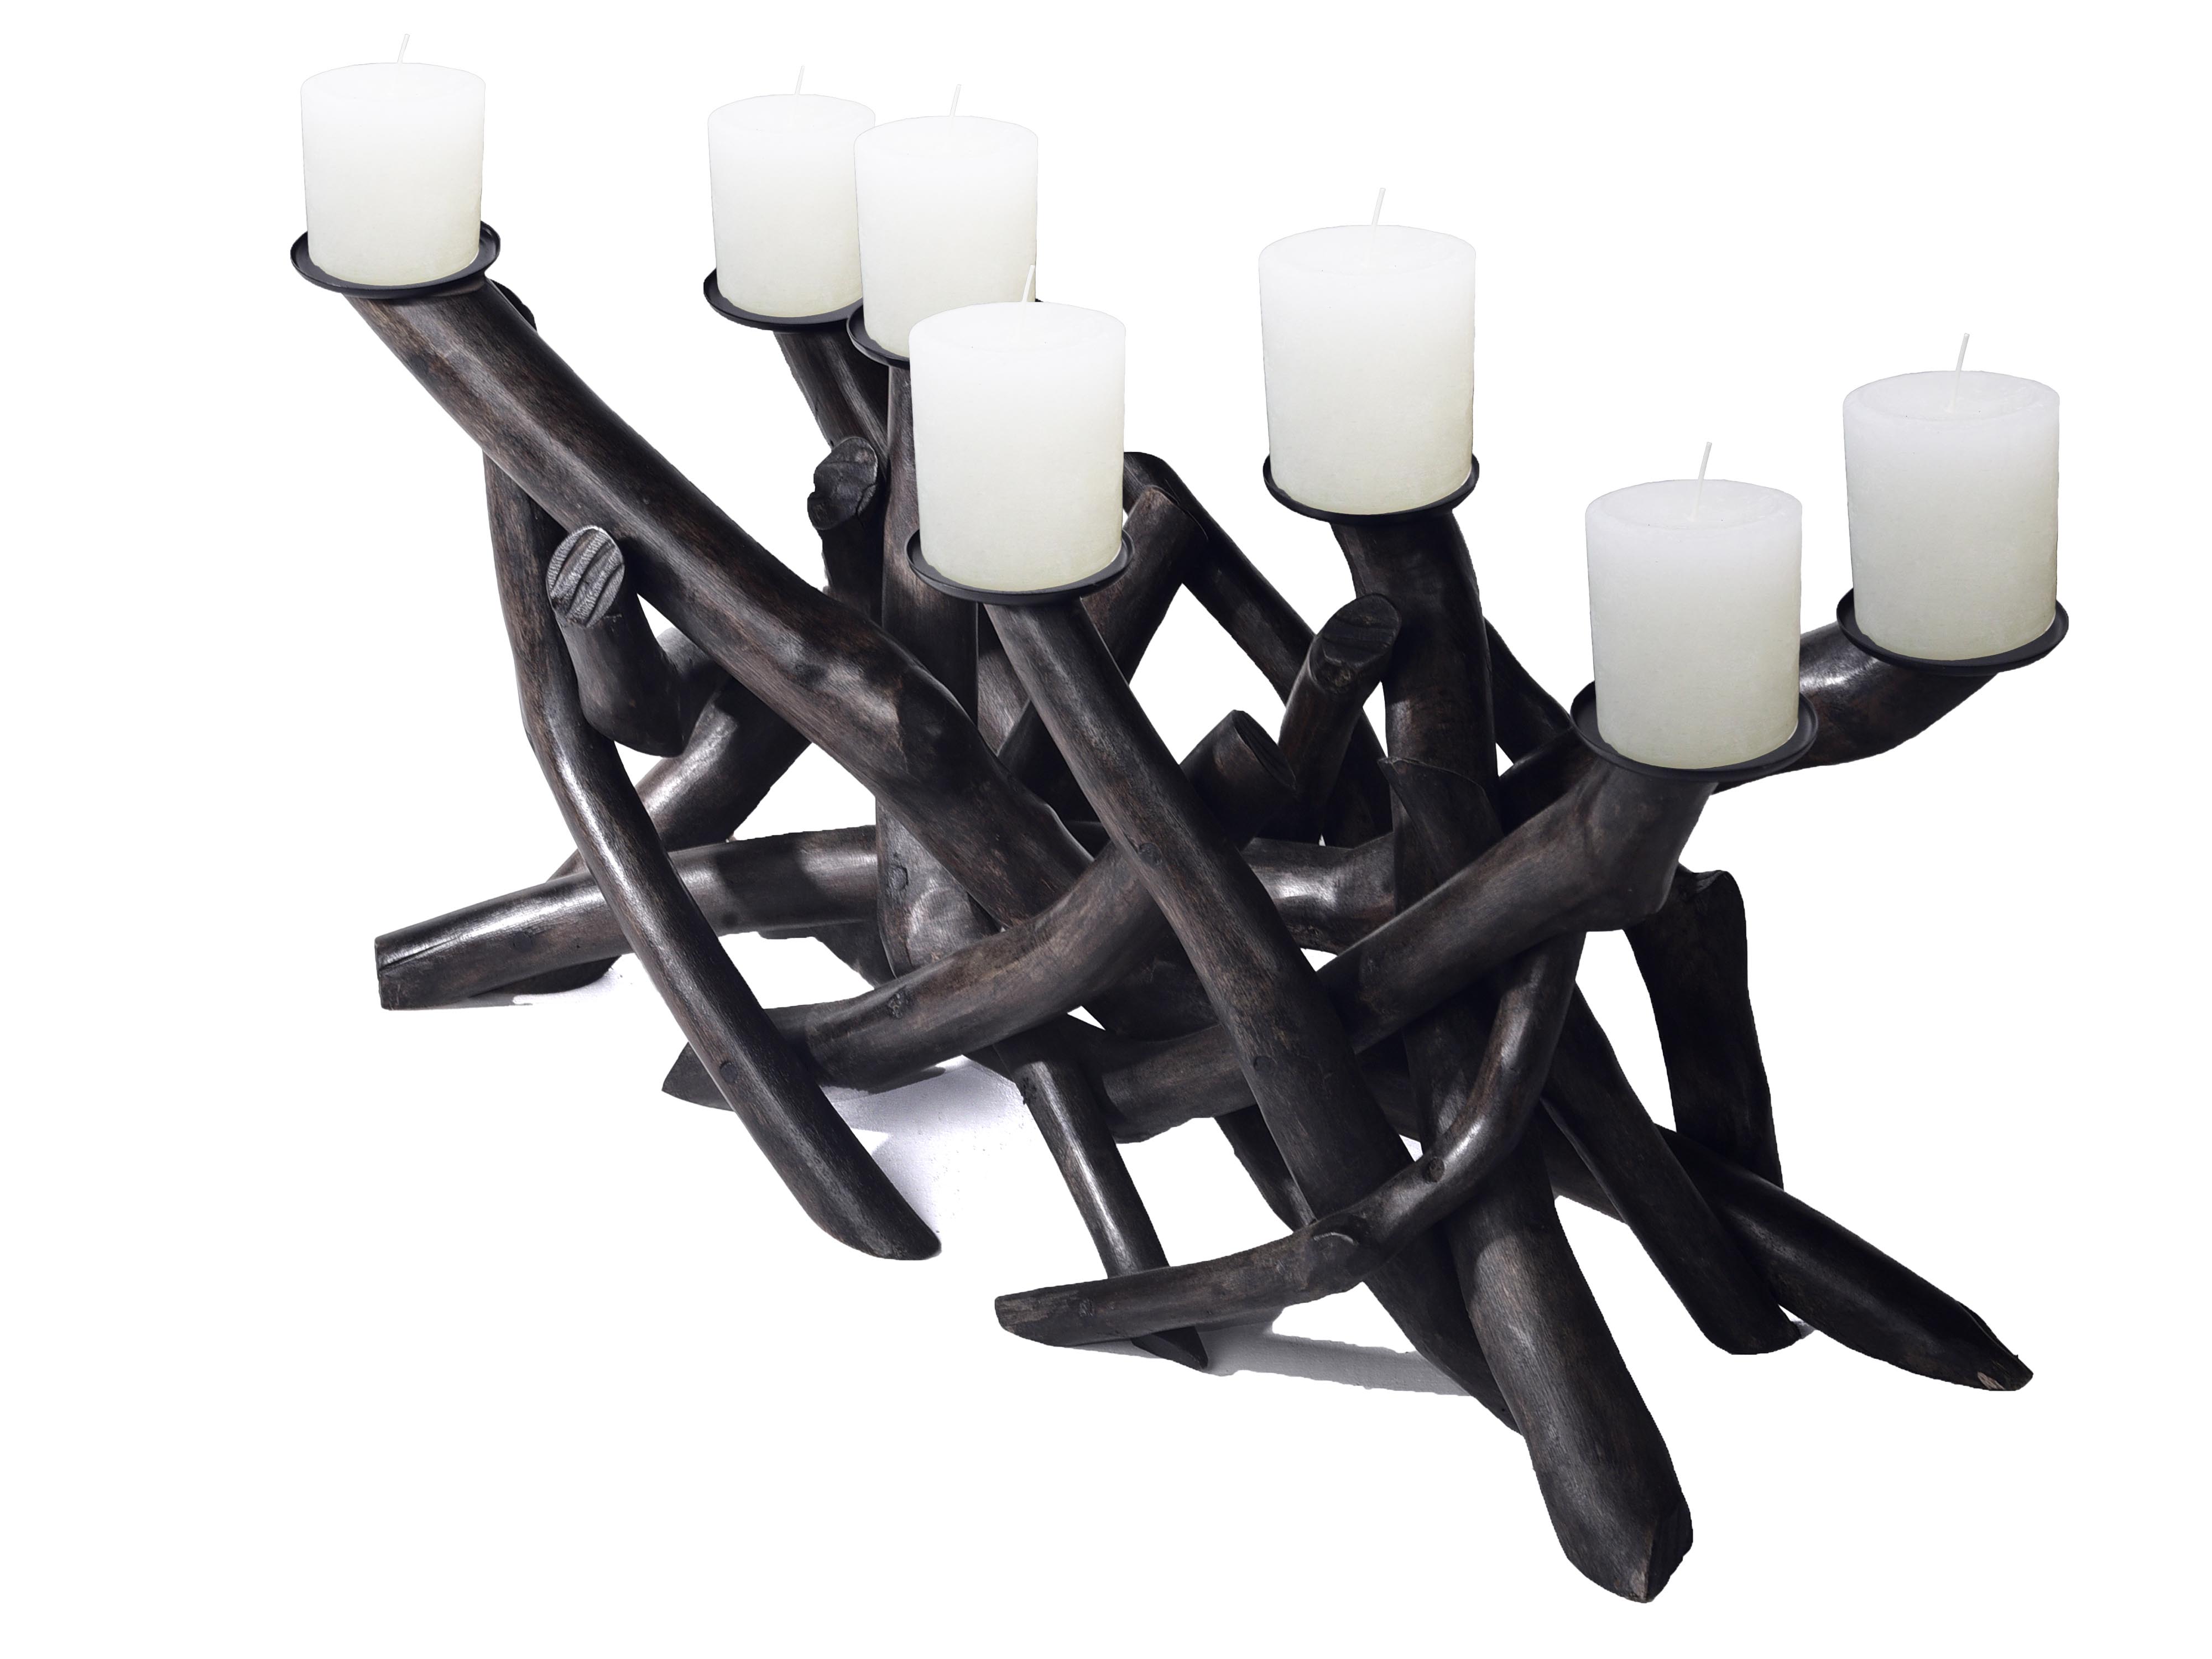 7 Cup Dark Waxed Driftwood Candelabra - NOTE CANDLES NOT INCLUDED